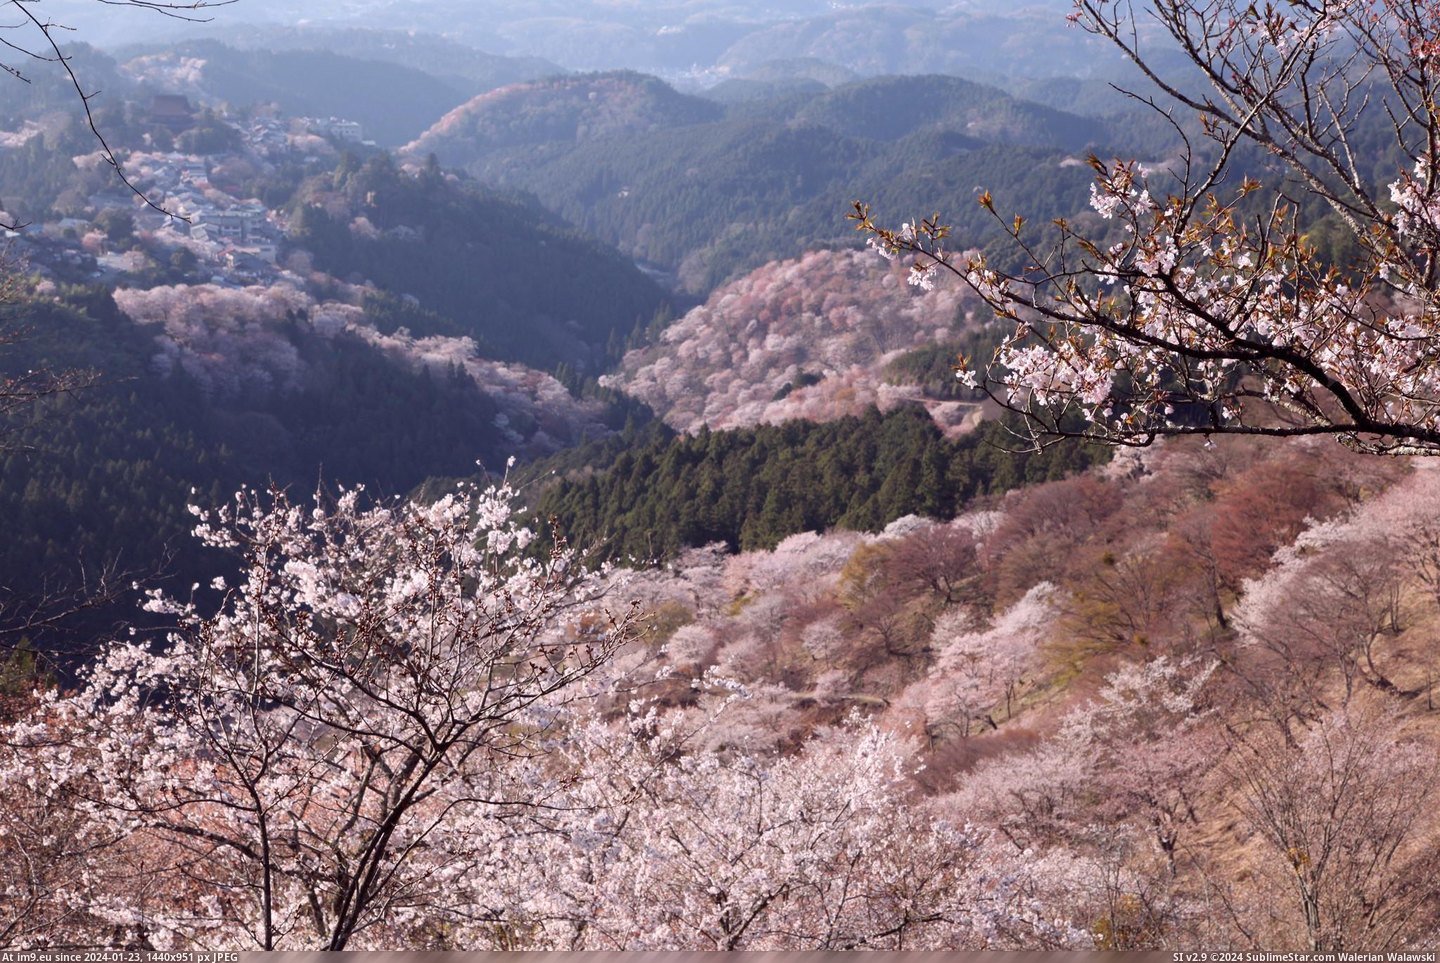 #Japan #Mountain #Covered #Yoshino #Mountainside #Cherry #2048x1365 #Blossoms [Earthporn] A mountainside covered in cherry blossoms at Yoshino Mountain, Japan [2048x1365] Pic. (Bild von album My r/EARTHPORN favs))